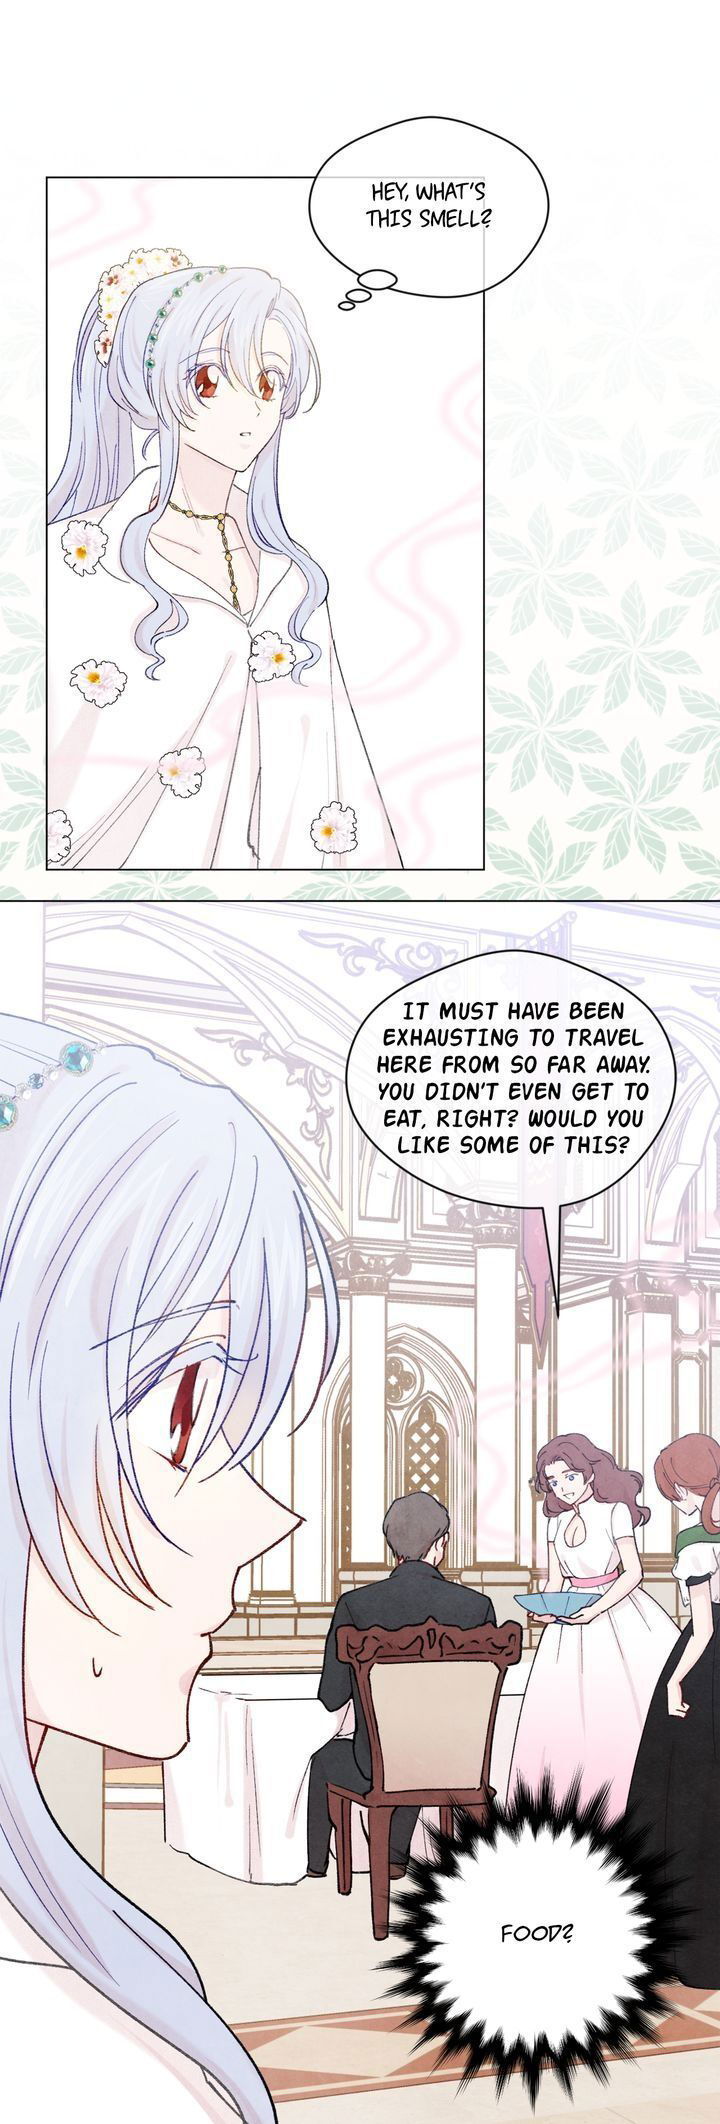 IRIS - Lady with a Smartphone Chapter 051 page 14